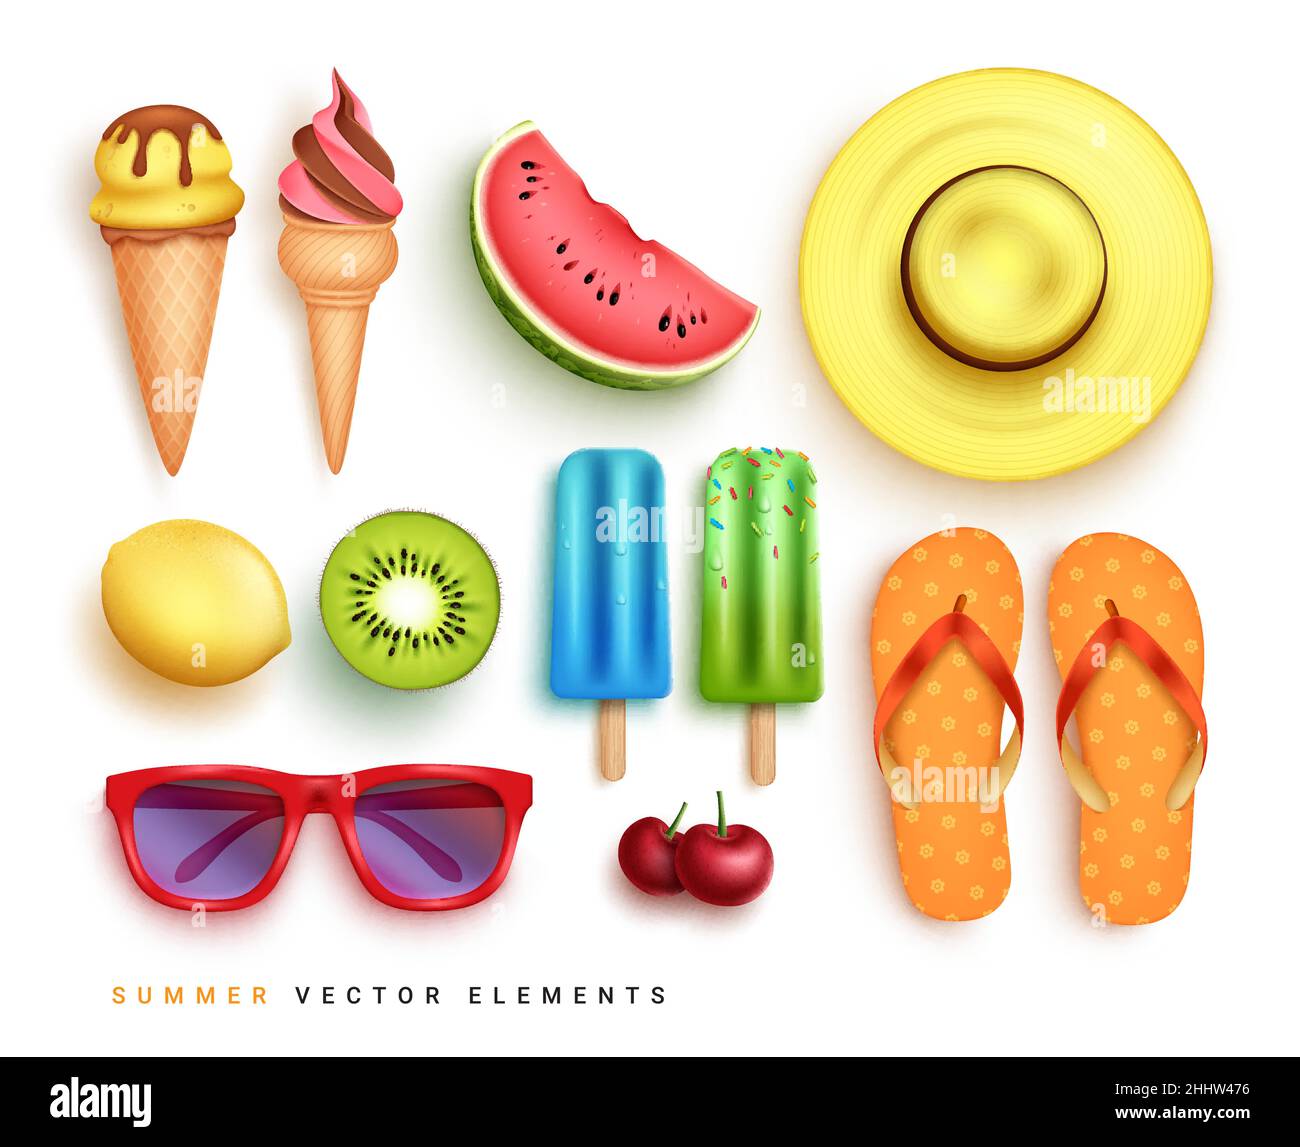 Summer elements vector set design. 3d realistic summer objects of ice cream, fruits, hat and flip flop isolated in white background for tropical. Stock Vector